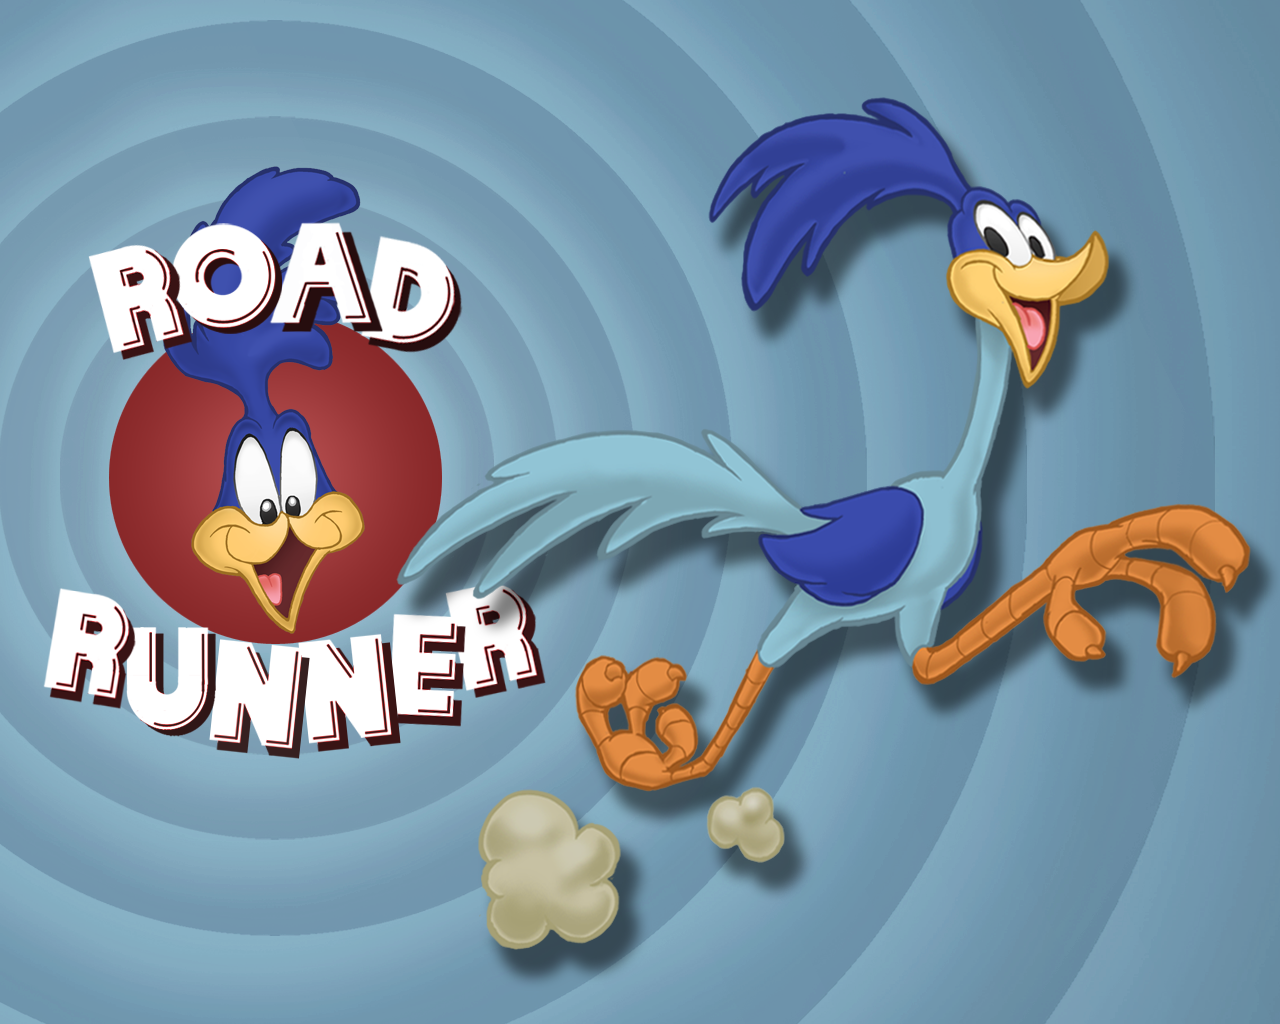 Download Road Runner Cartoon Wallpaper in high resolution for free